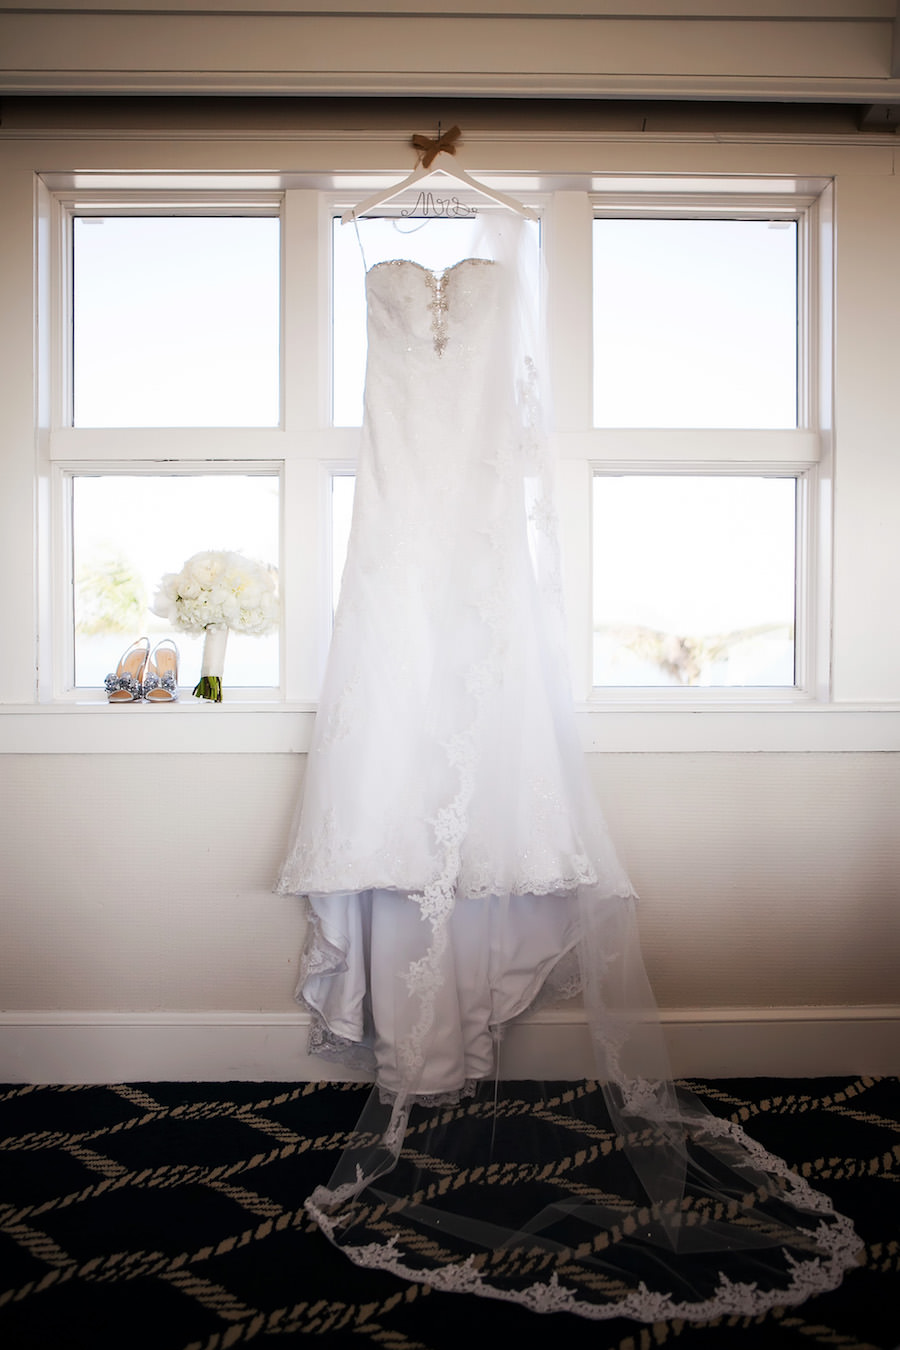 Strapless, Sweetheart White Lace Wedding Dress with Rhinestone Detail on Bodice and Cathedral Veil | Clearwater Wedding Photographer Limelight Photography